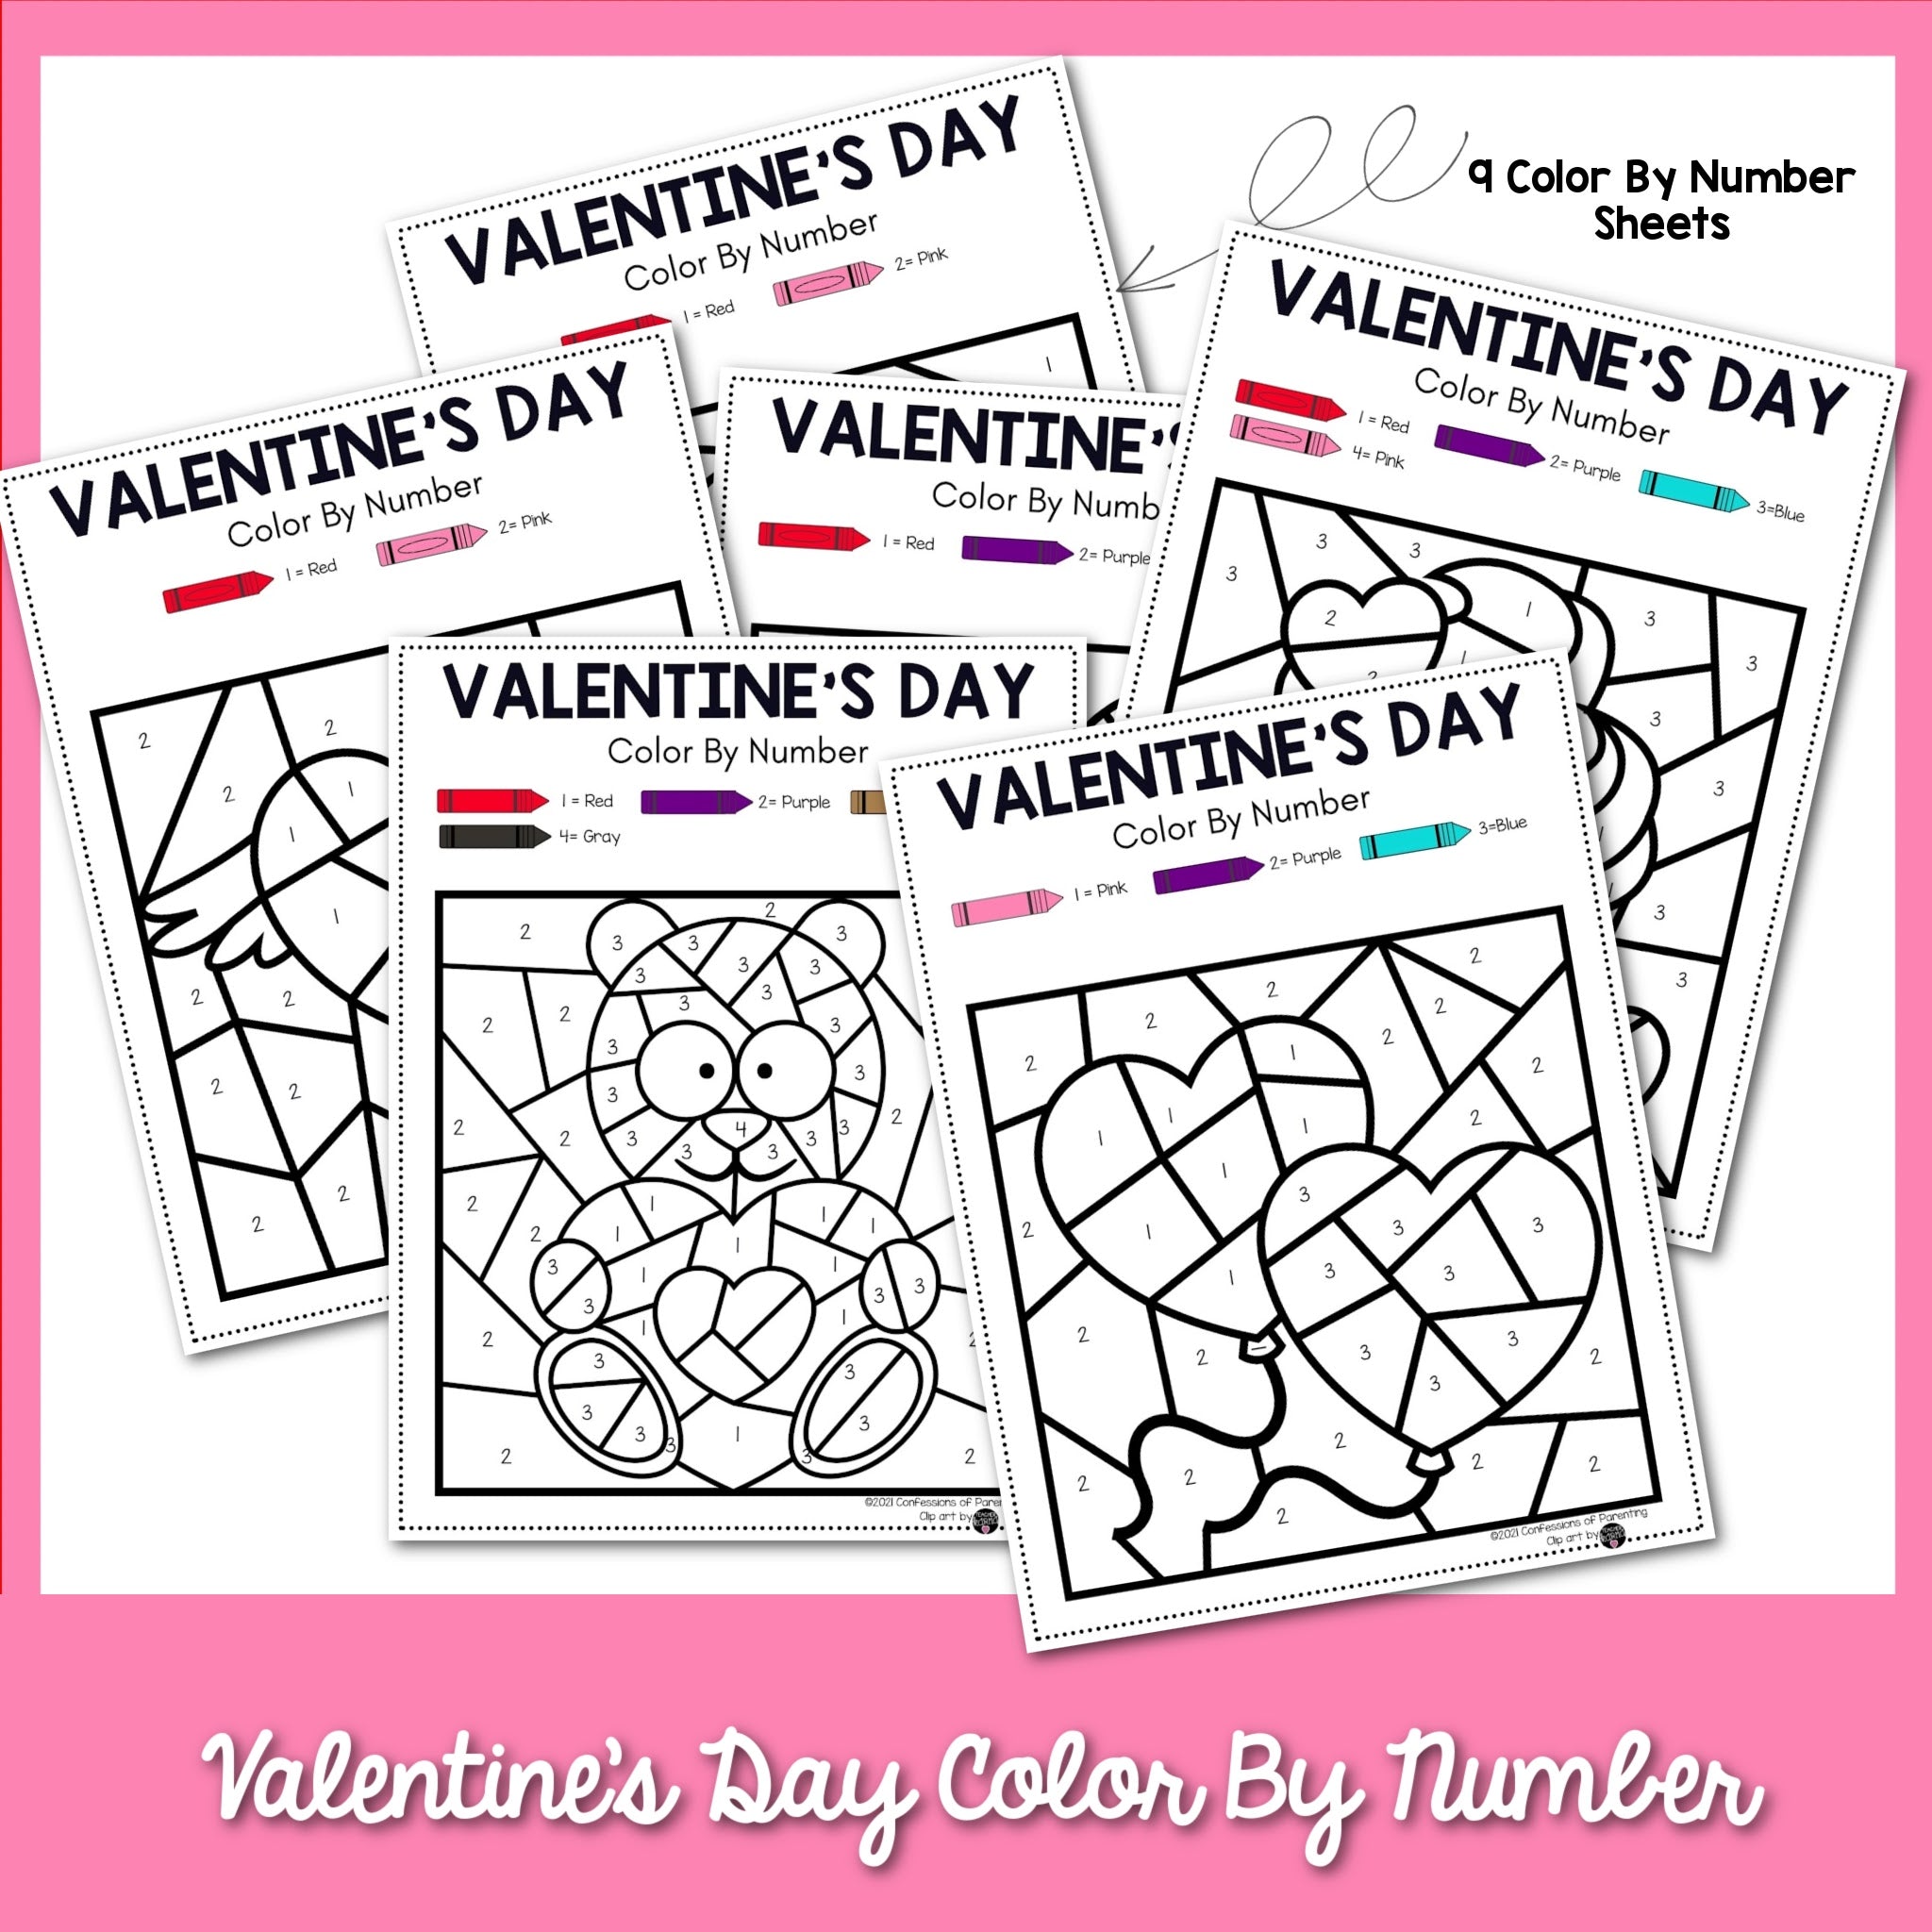 Tissue Paper Valentines Craft - Frosting and Glue- Easy crafts, games,  recipes, and fun